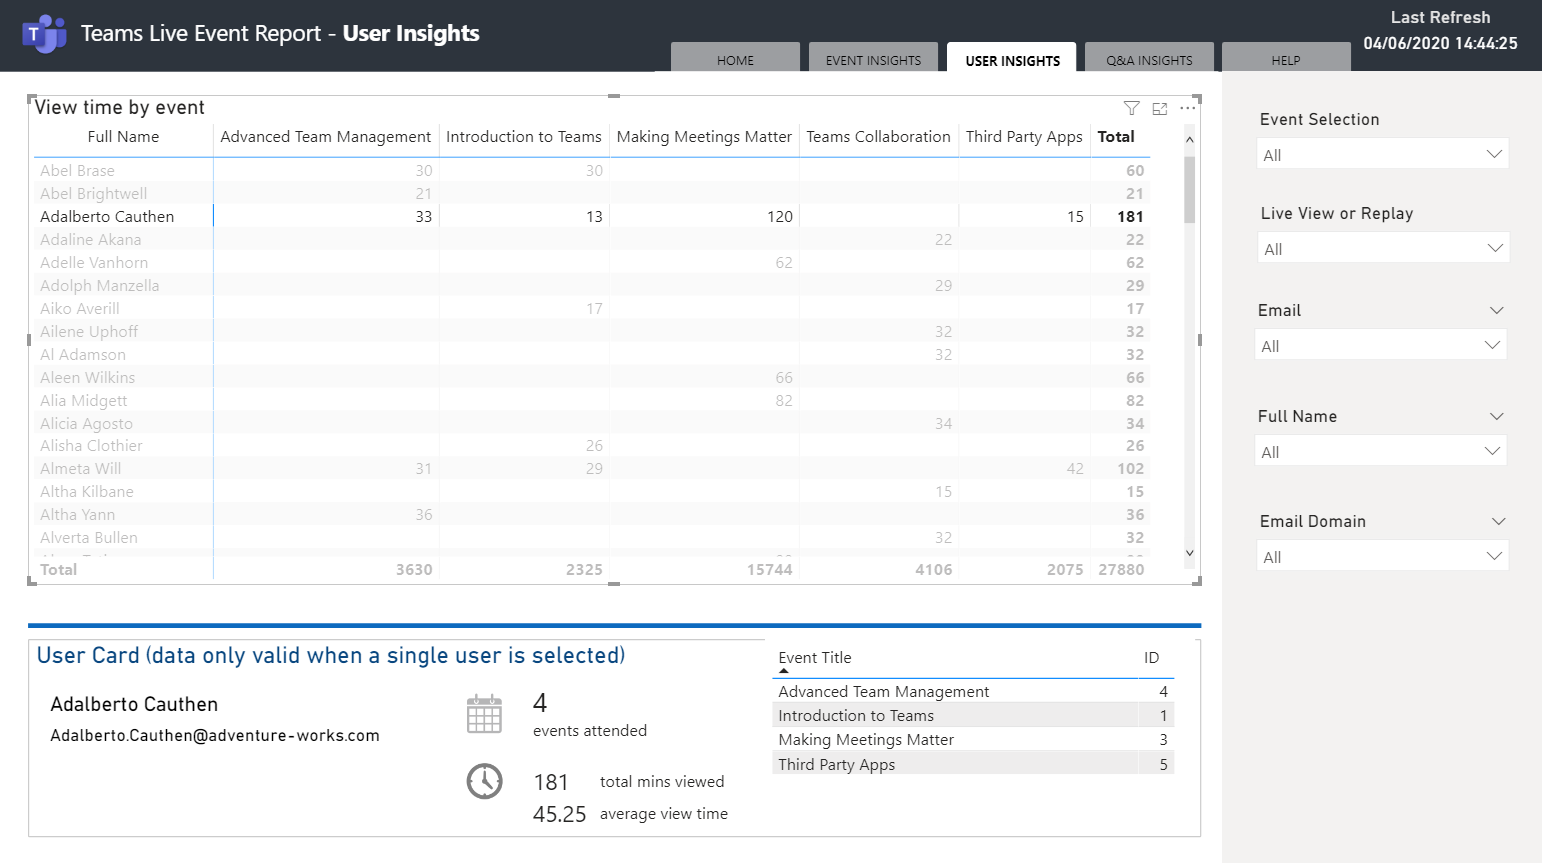 User insights page of BI dashboard showing individual attendance by event